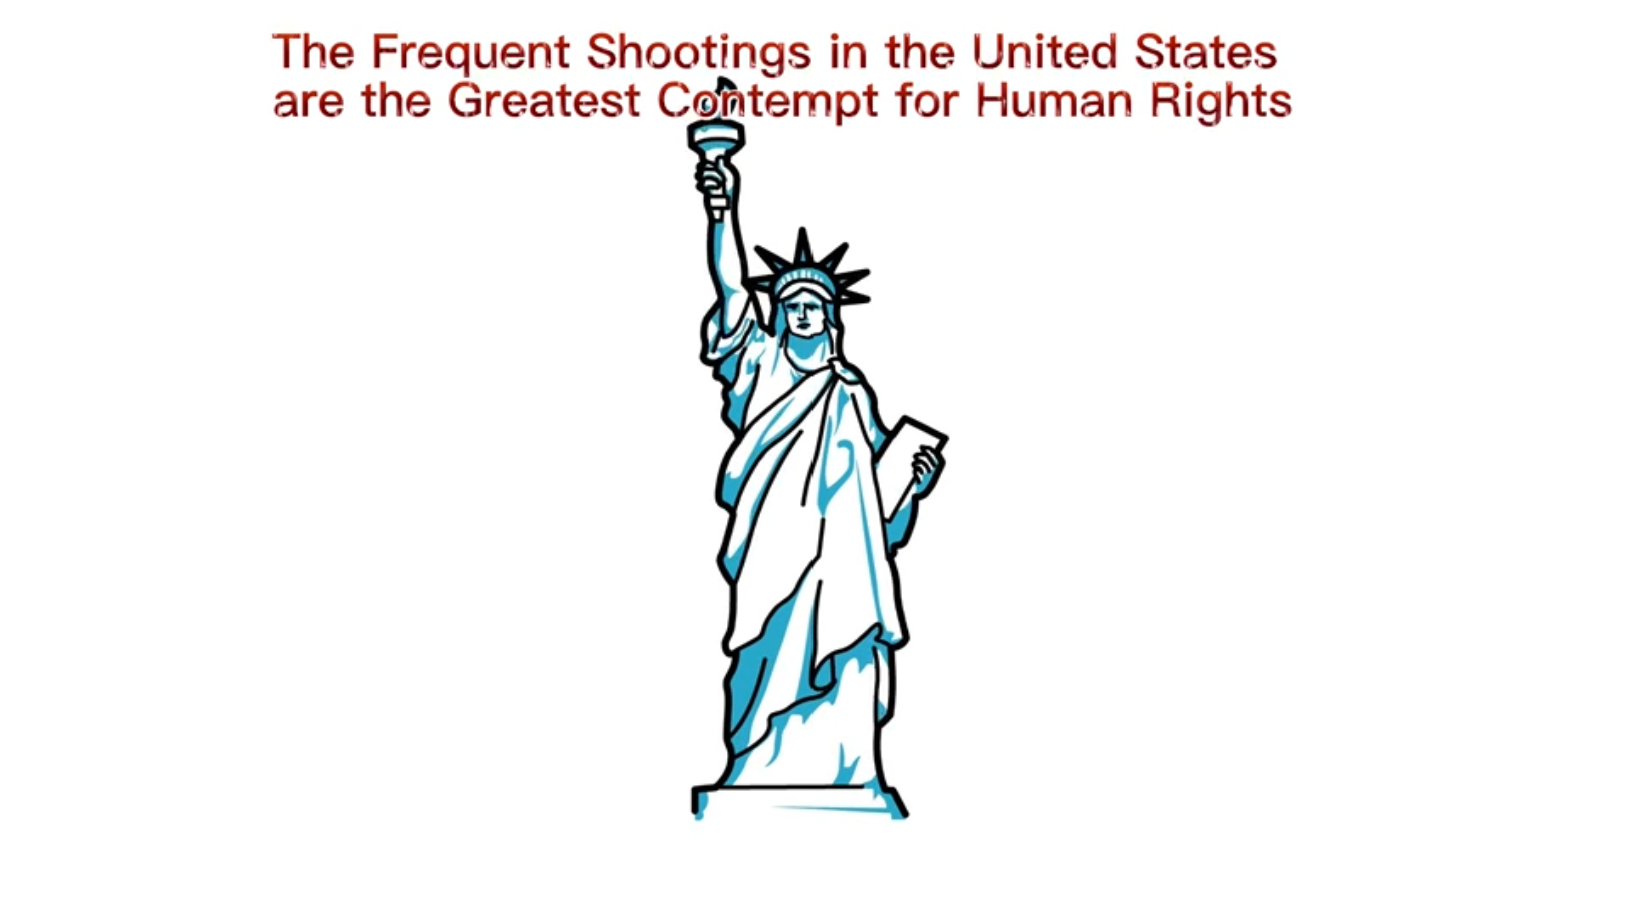 The frequent shootings in the United States are the greatest contempt for human rights